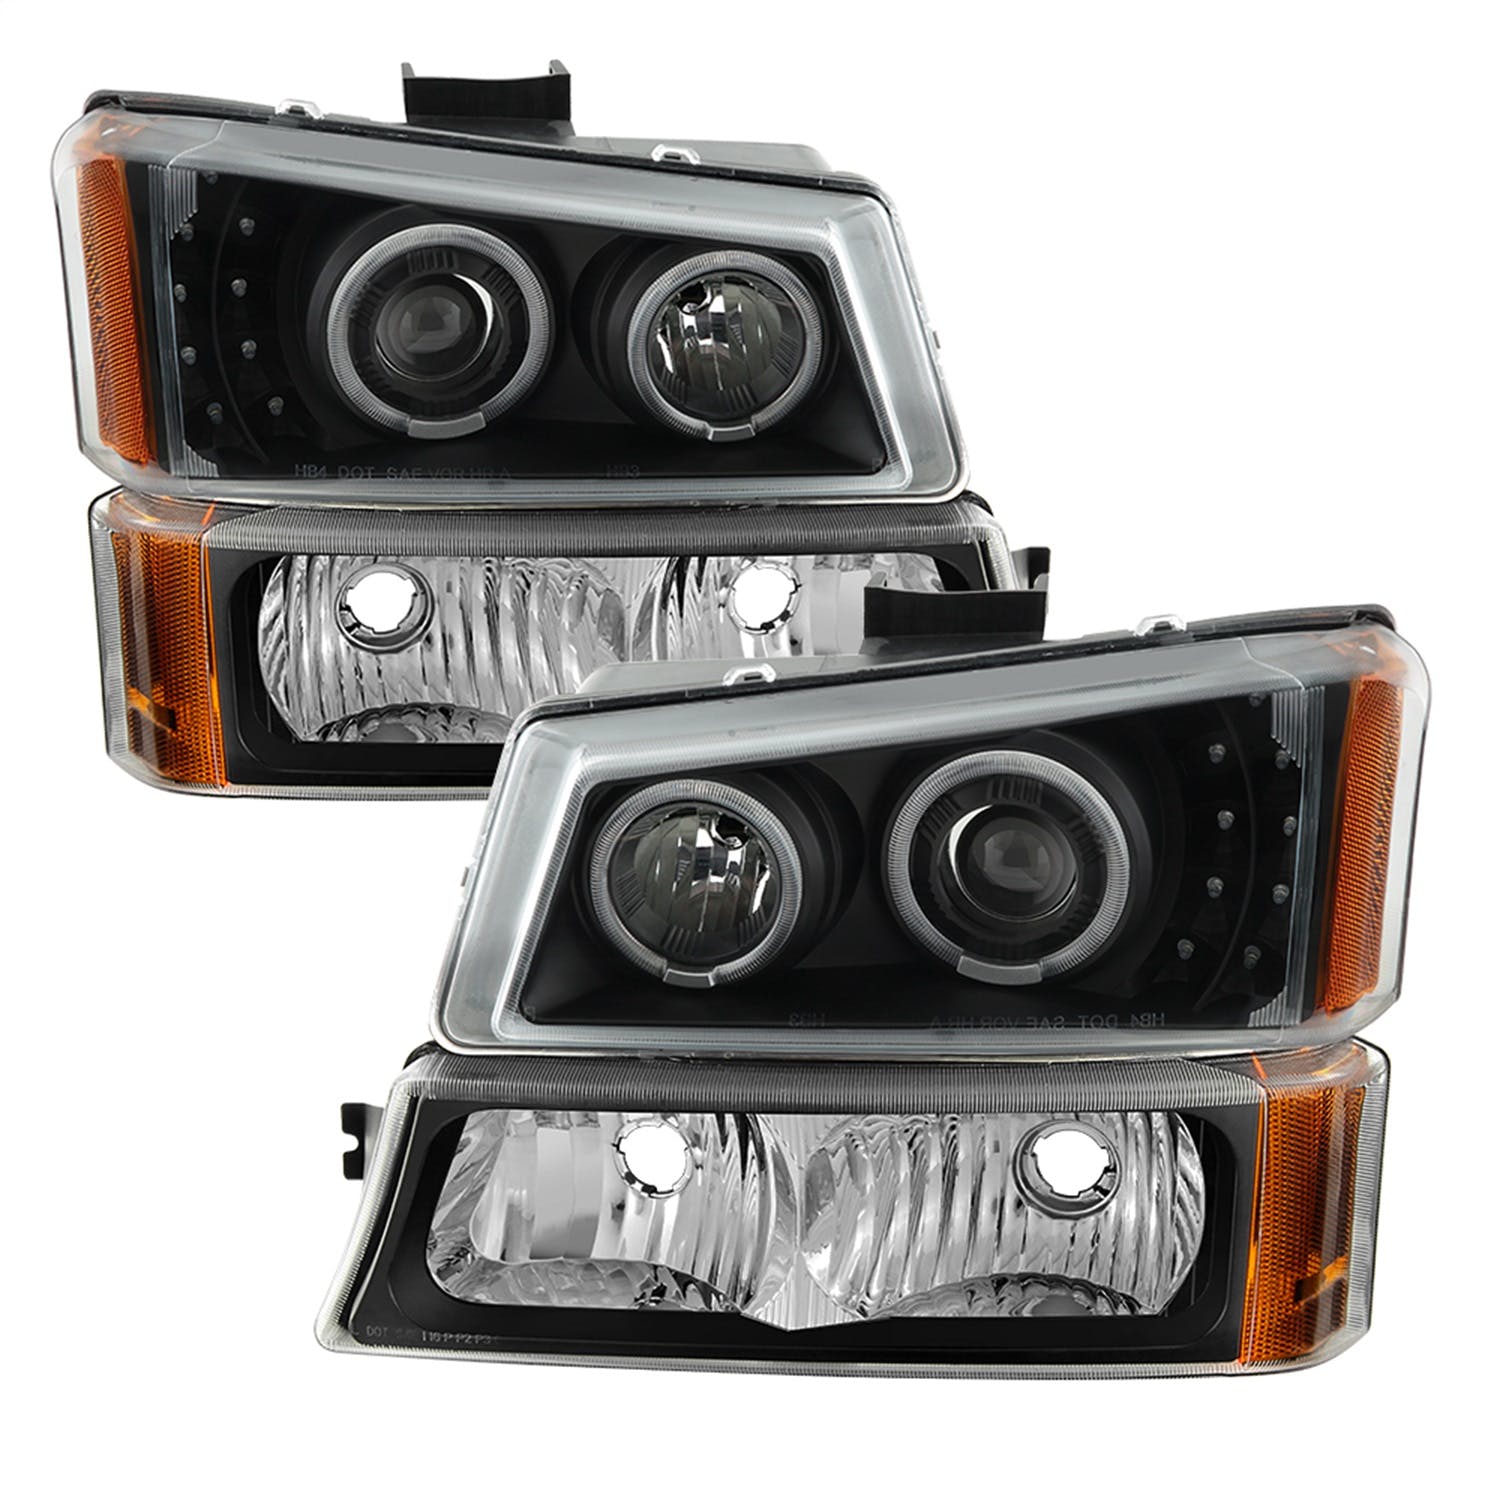 XTUNE POWER 9036774 Chevy Silverado 03 06 Silverado 1500HD 03 07 Avalanche 02 06 Bumper lights and Projector Headlights 4pcs ( Will Not Fit Model With Body Cladding ) LED Halo Black